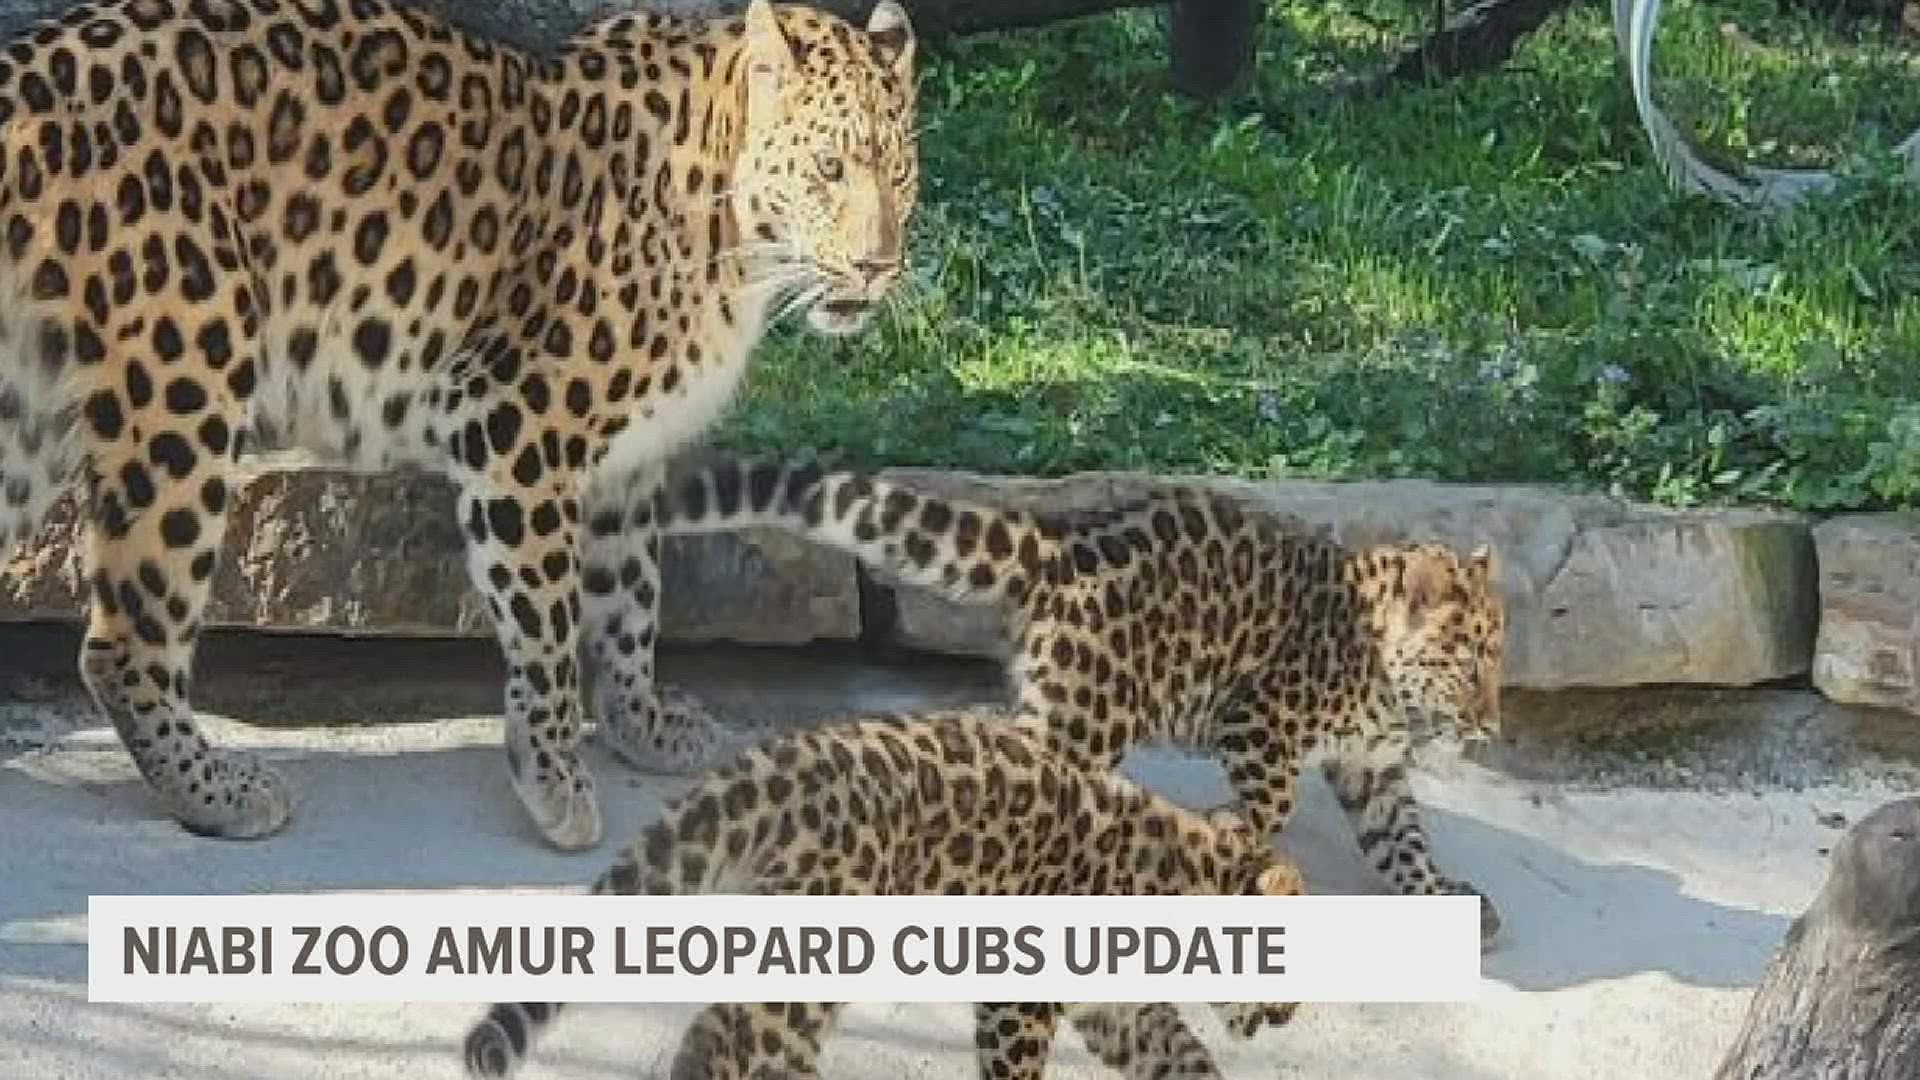 The Niabi Zoo says Iona and her cubs are fast becoming a favorite stop when guests visit.